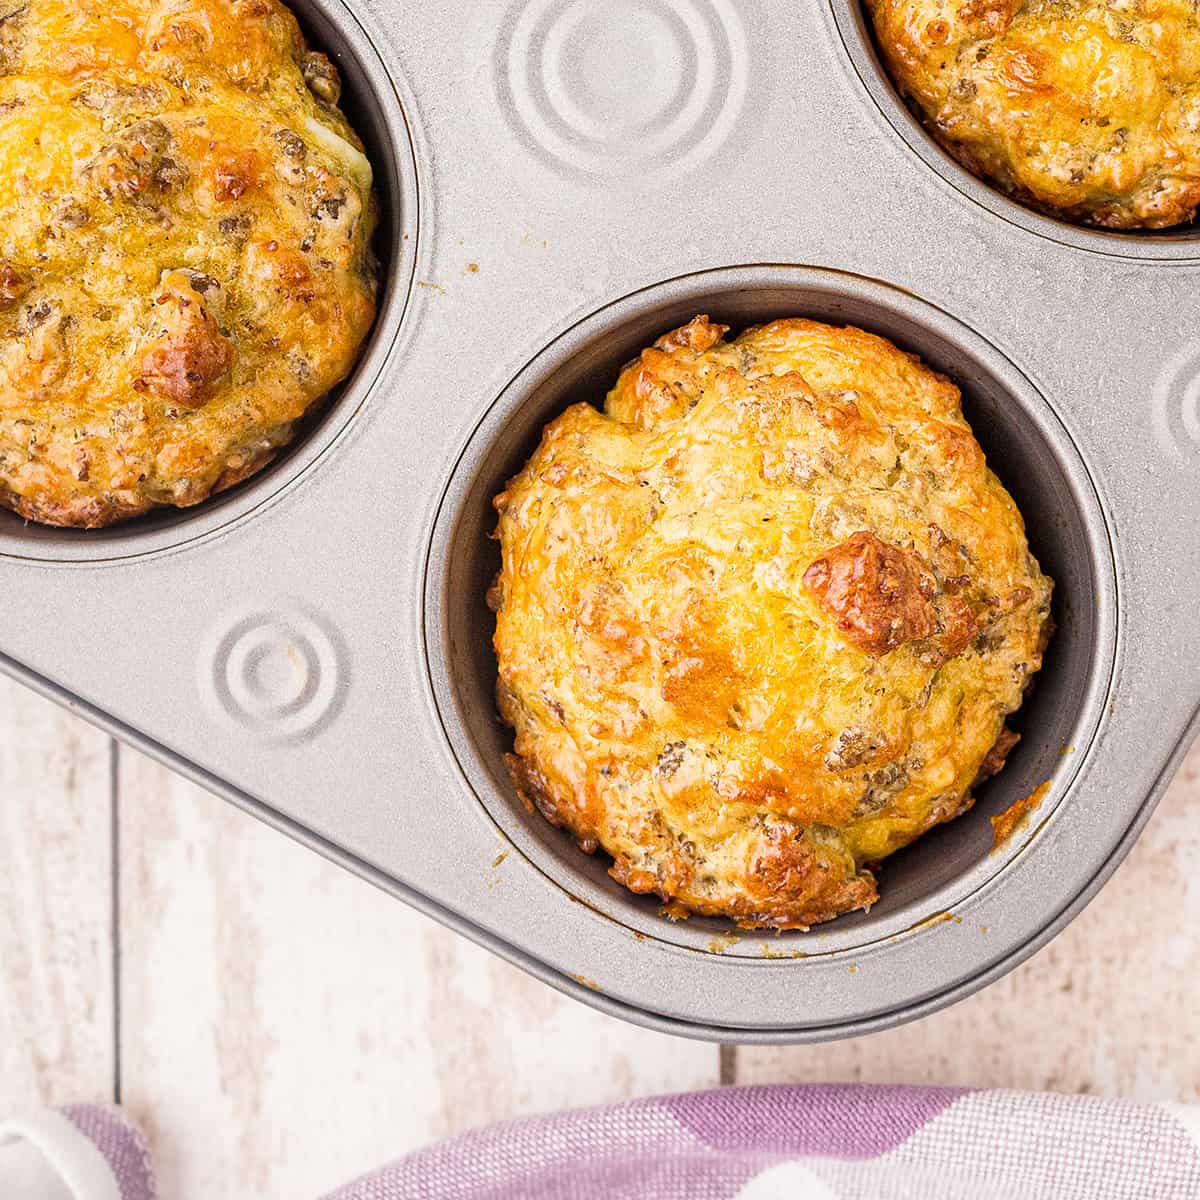 Golden brown cooked Easy Sausage Muffins in a muffin baking pan.